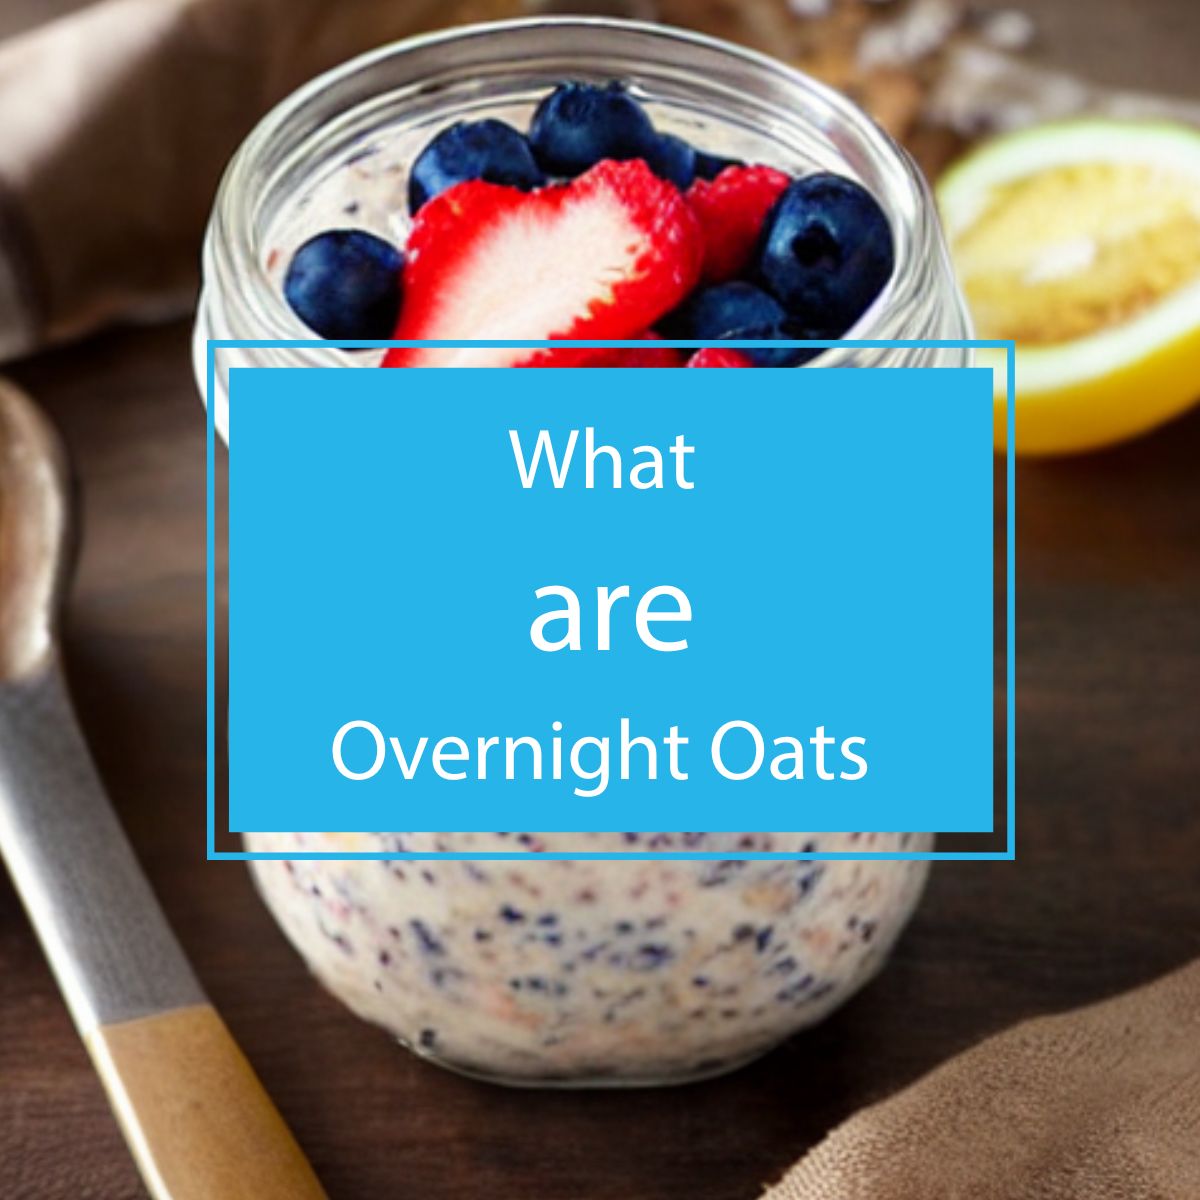 What are overnight oats